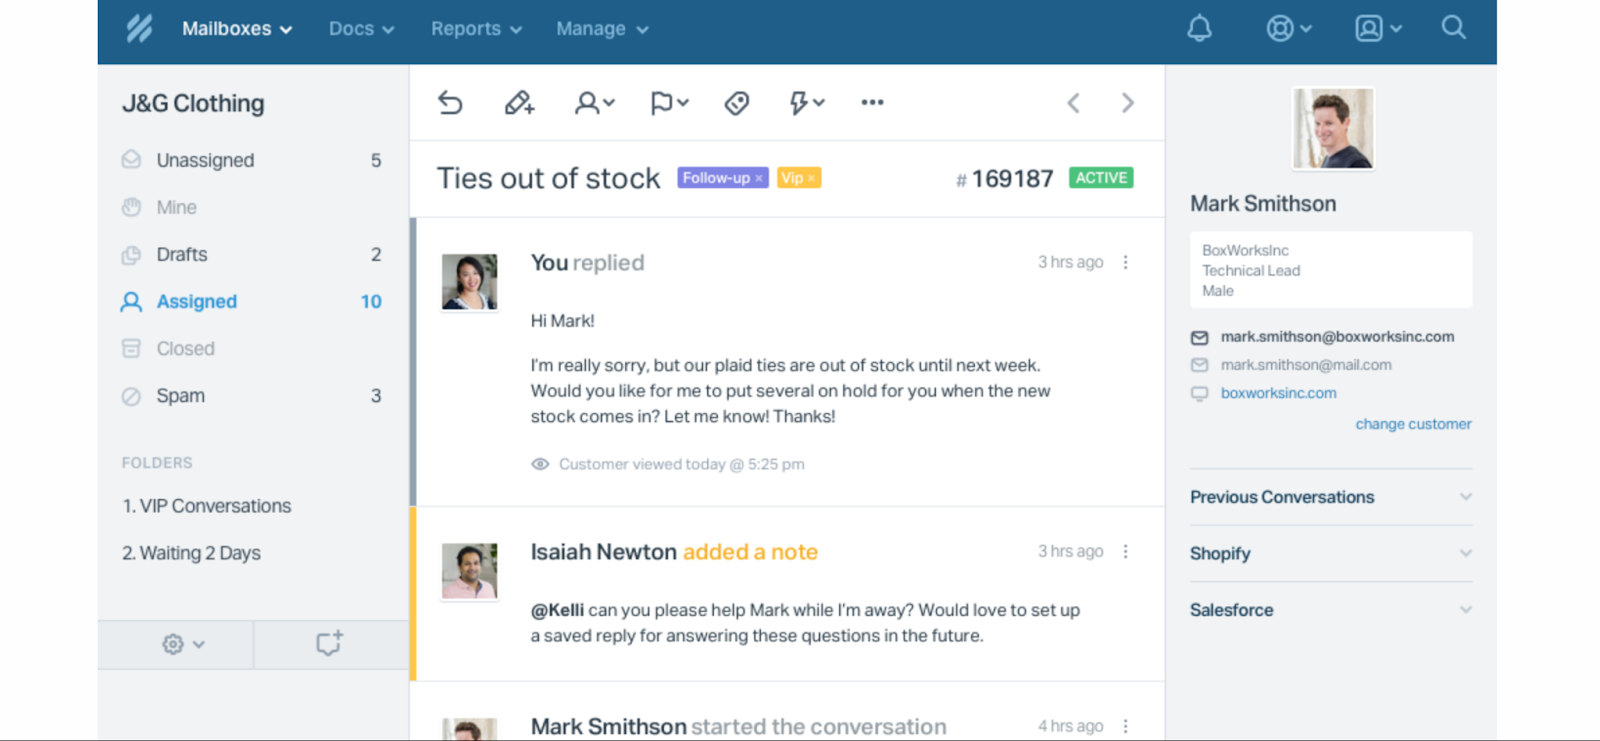 Image of a ticketing interface from Help Scout, a Freshdesk alternative. The active ticket titled 'Ties out of stock' shows a conversation between a support agent and a customer named Mark Smithson, with the agent apologizing for the unavailability of plaid ties and offering to reserve some upon restock. The sidebar displays customer information, including name, company, and contact details. Notes from another team member and links to previous conversations with Shopify and Salesforce are also visible.